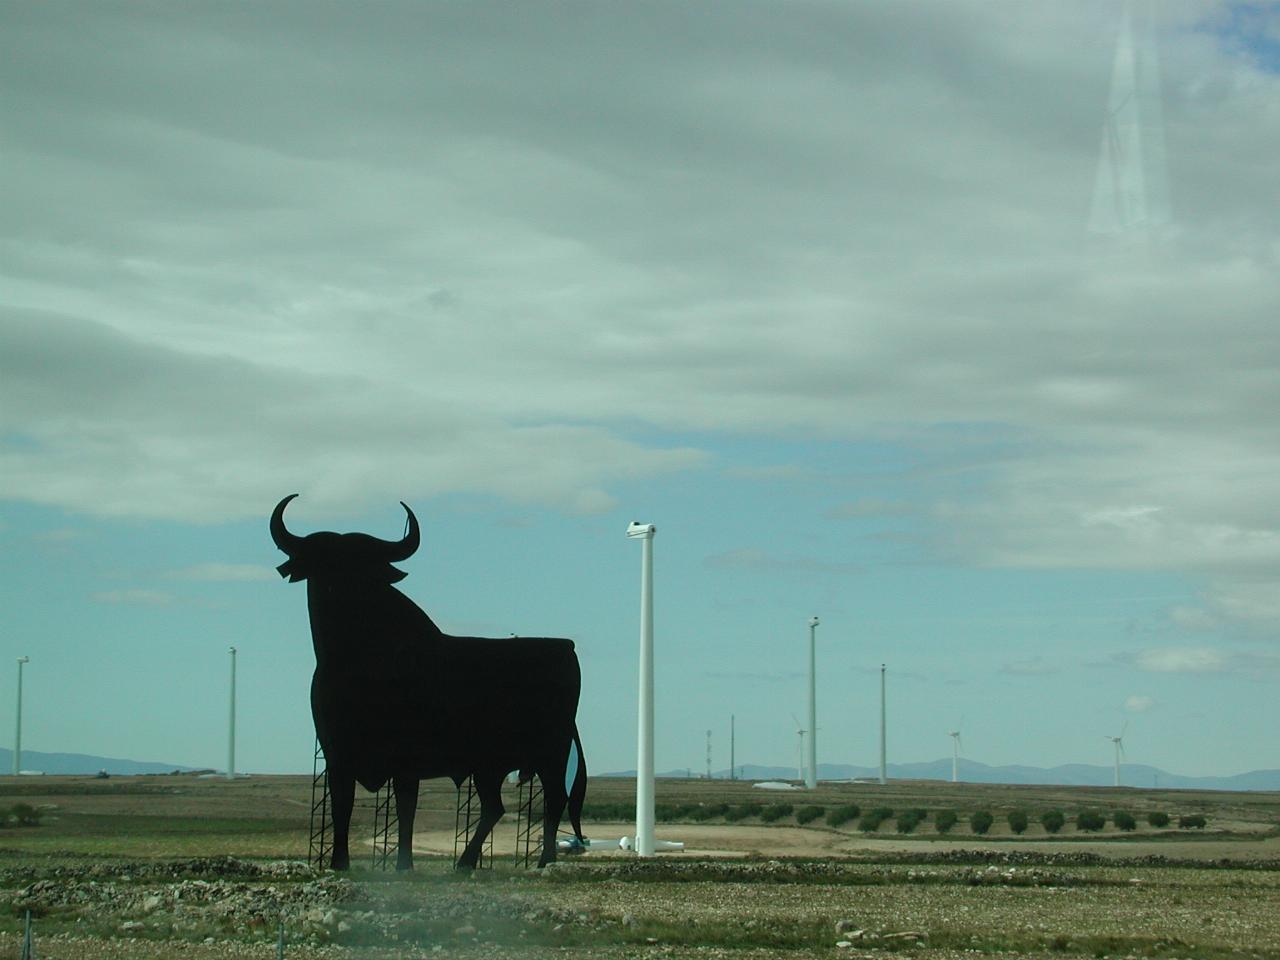 Another bull in the middle of a windmill farm (under construction)